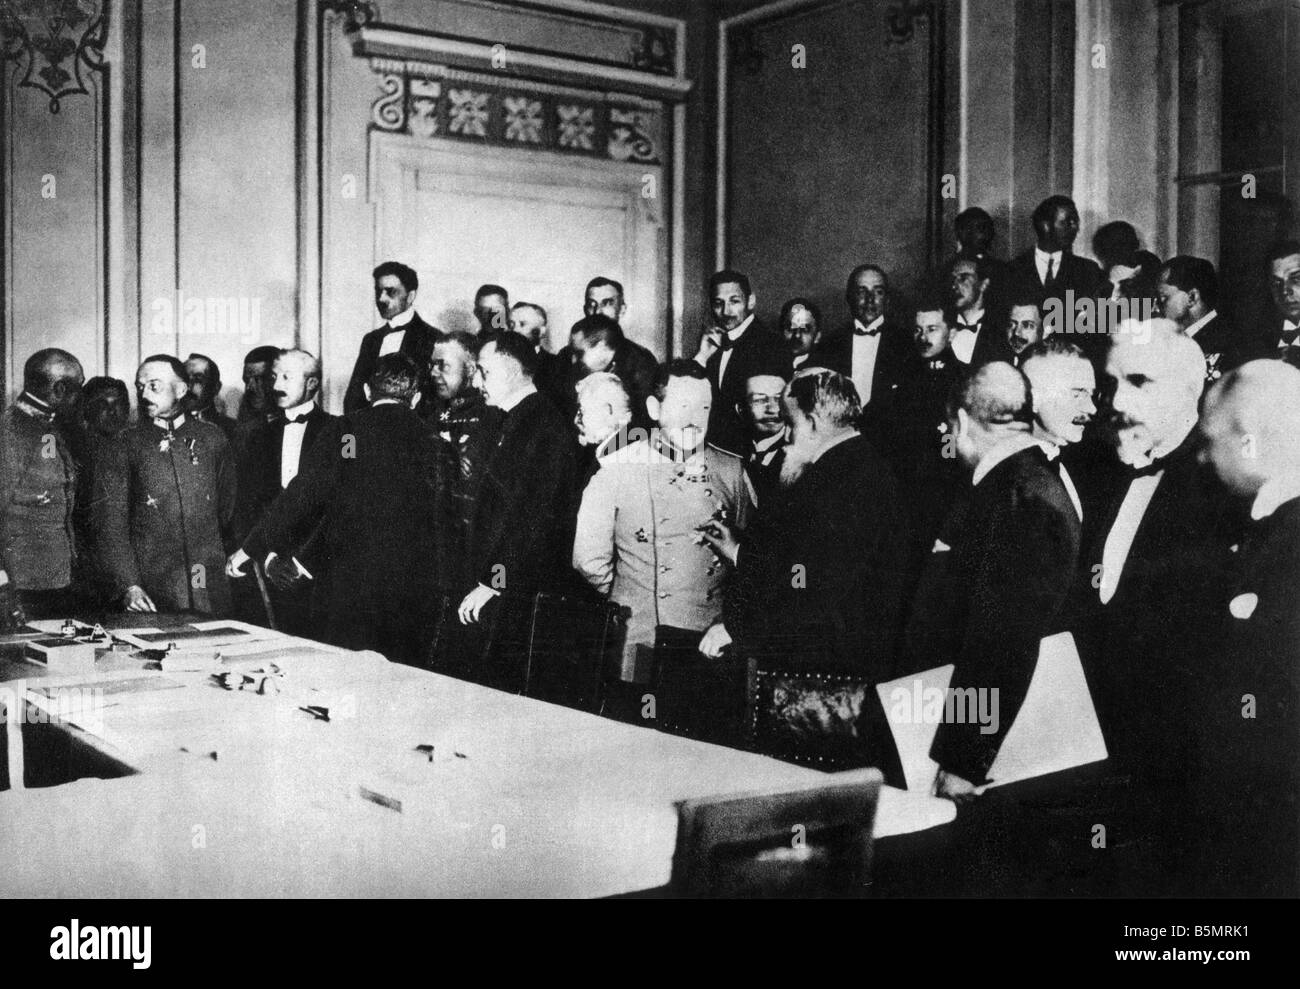 9 1918 2 9 A1 1 Final session Peace with Ukraine 1918 World War 1 Separate peace of the Central Powers wi th t Ukraine in Brest Stock Photo